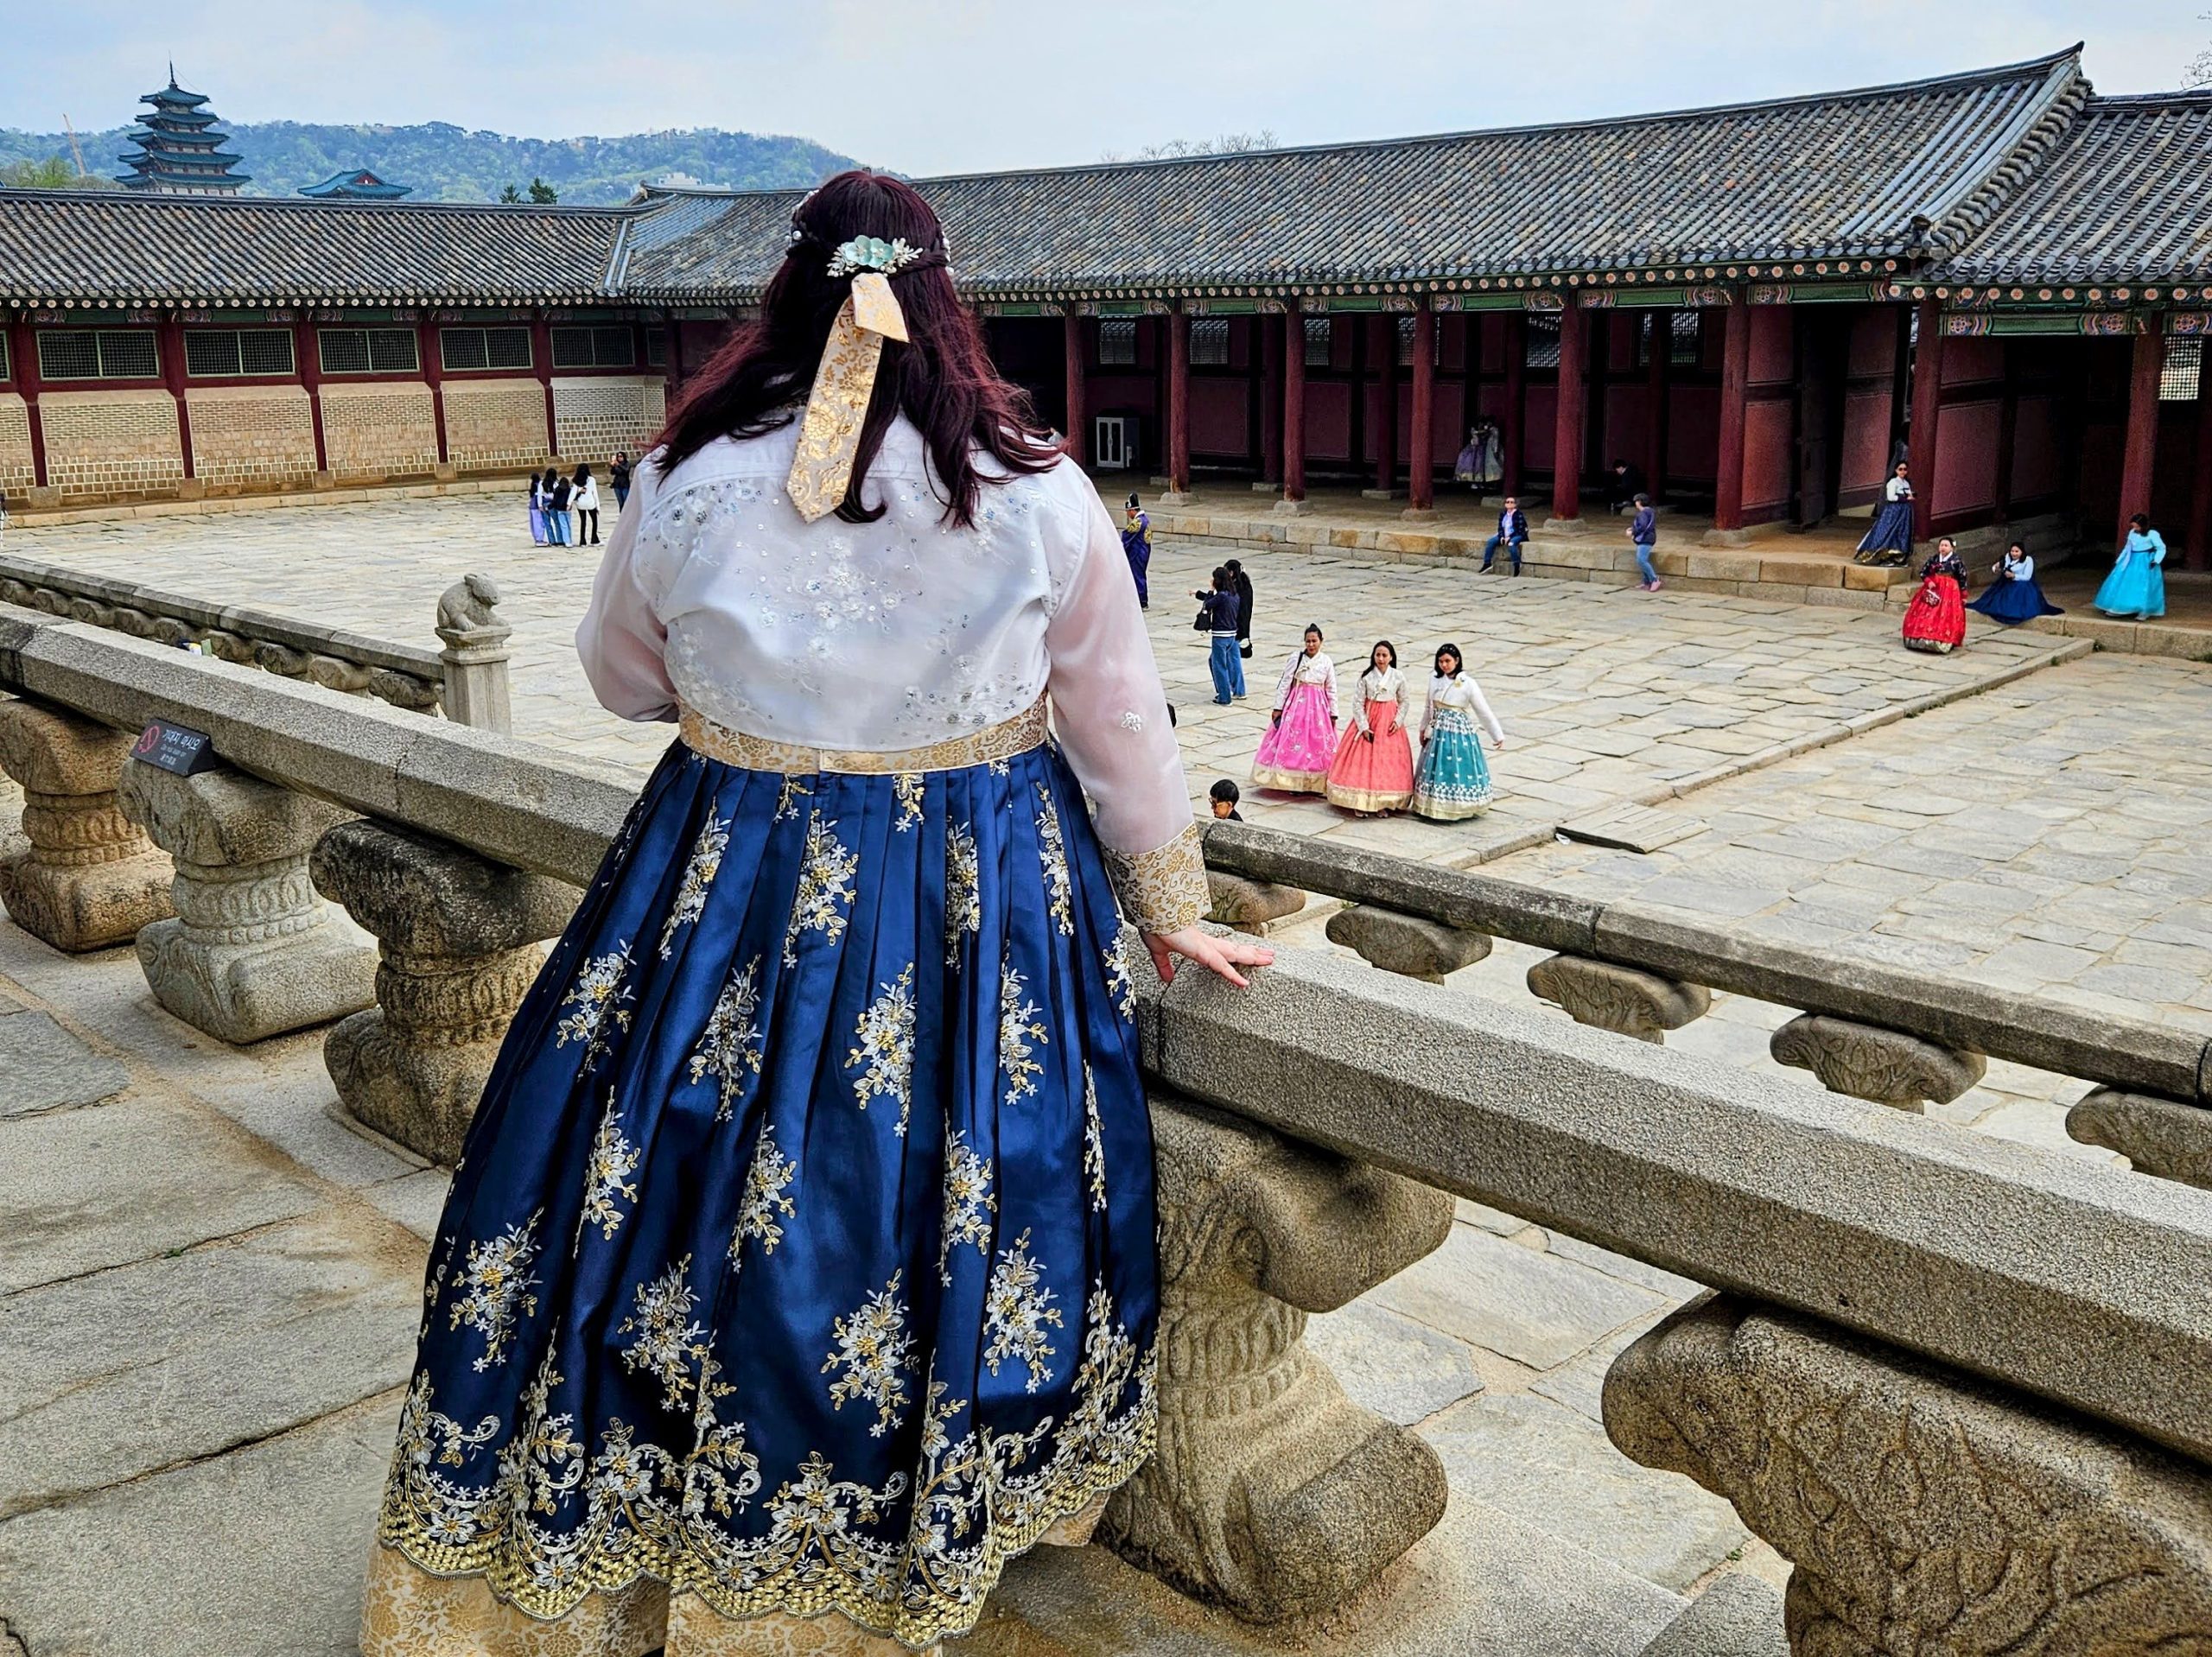 Photo of me wearing plus size Hanbok at Gyeongbokgung palace. I'm standing on a ledge and below are more people wearing hanbok posing for photos.